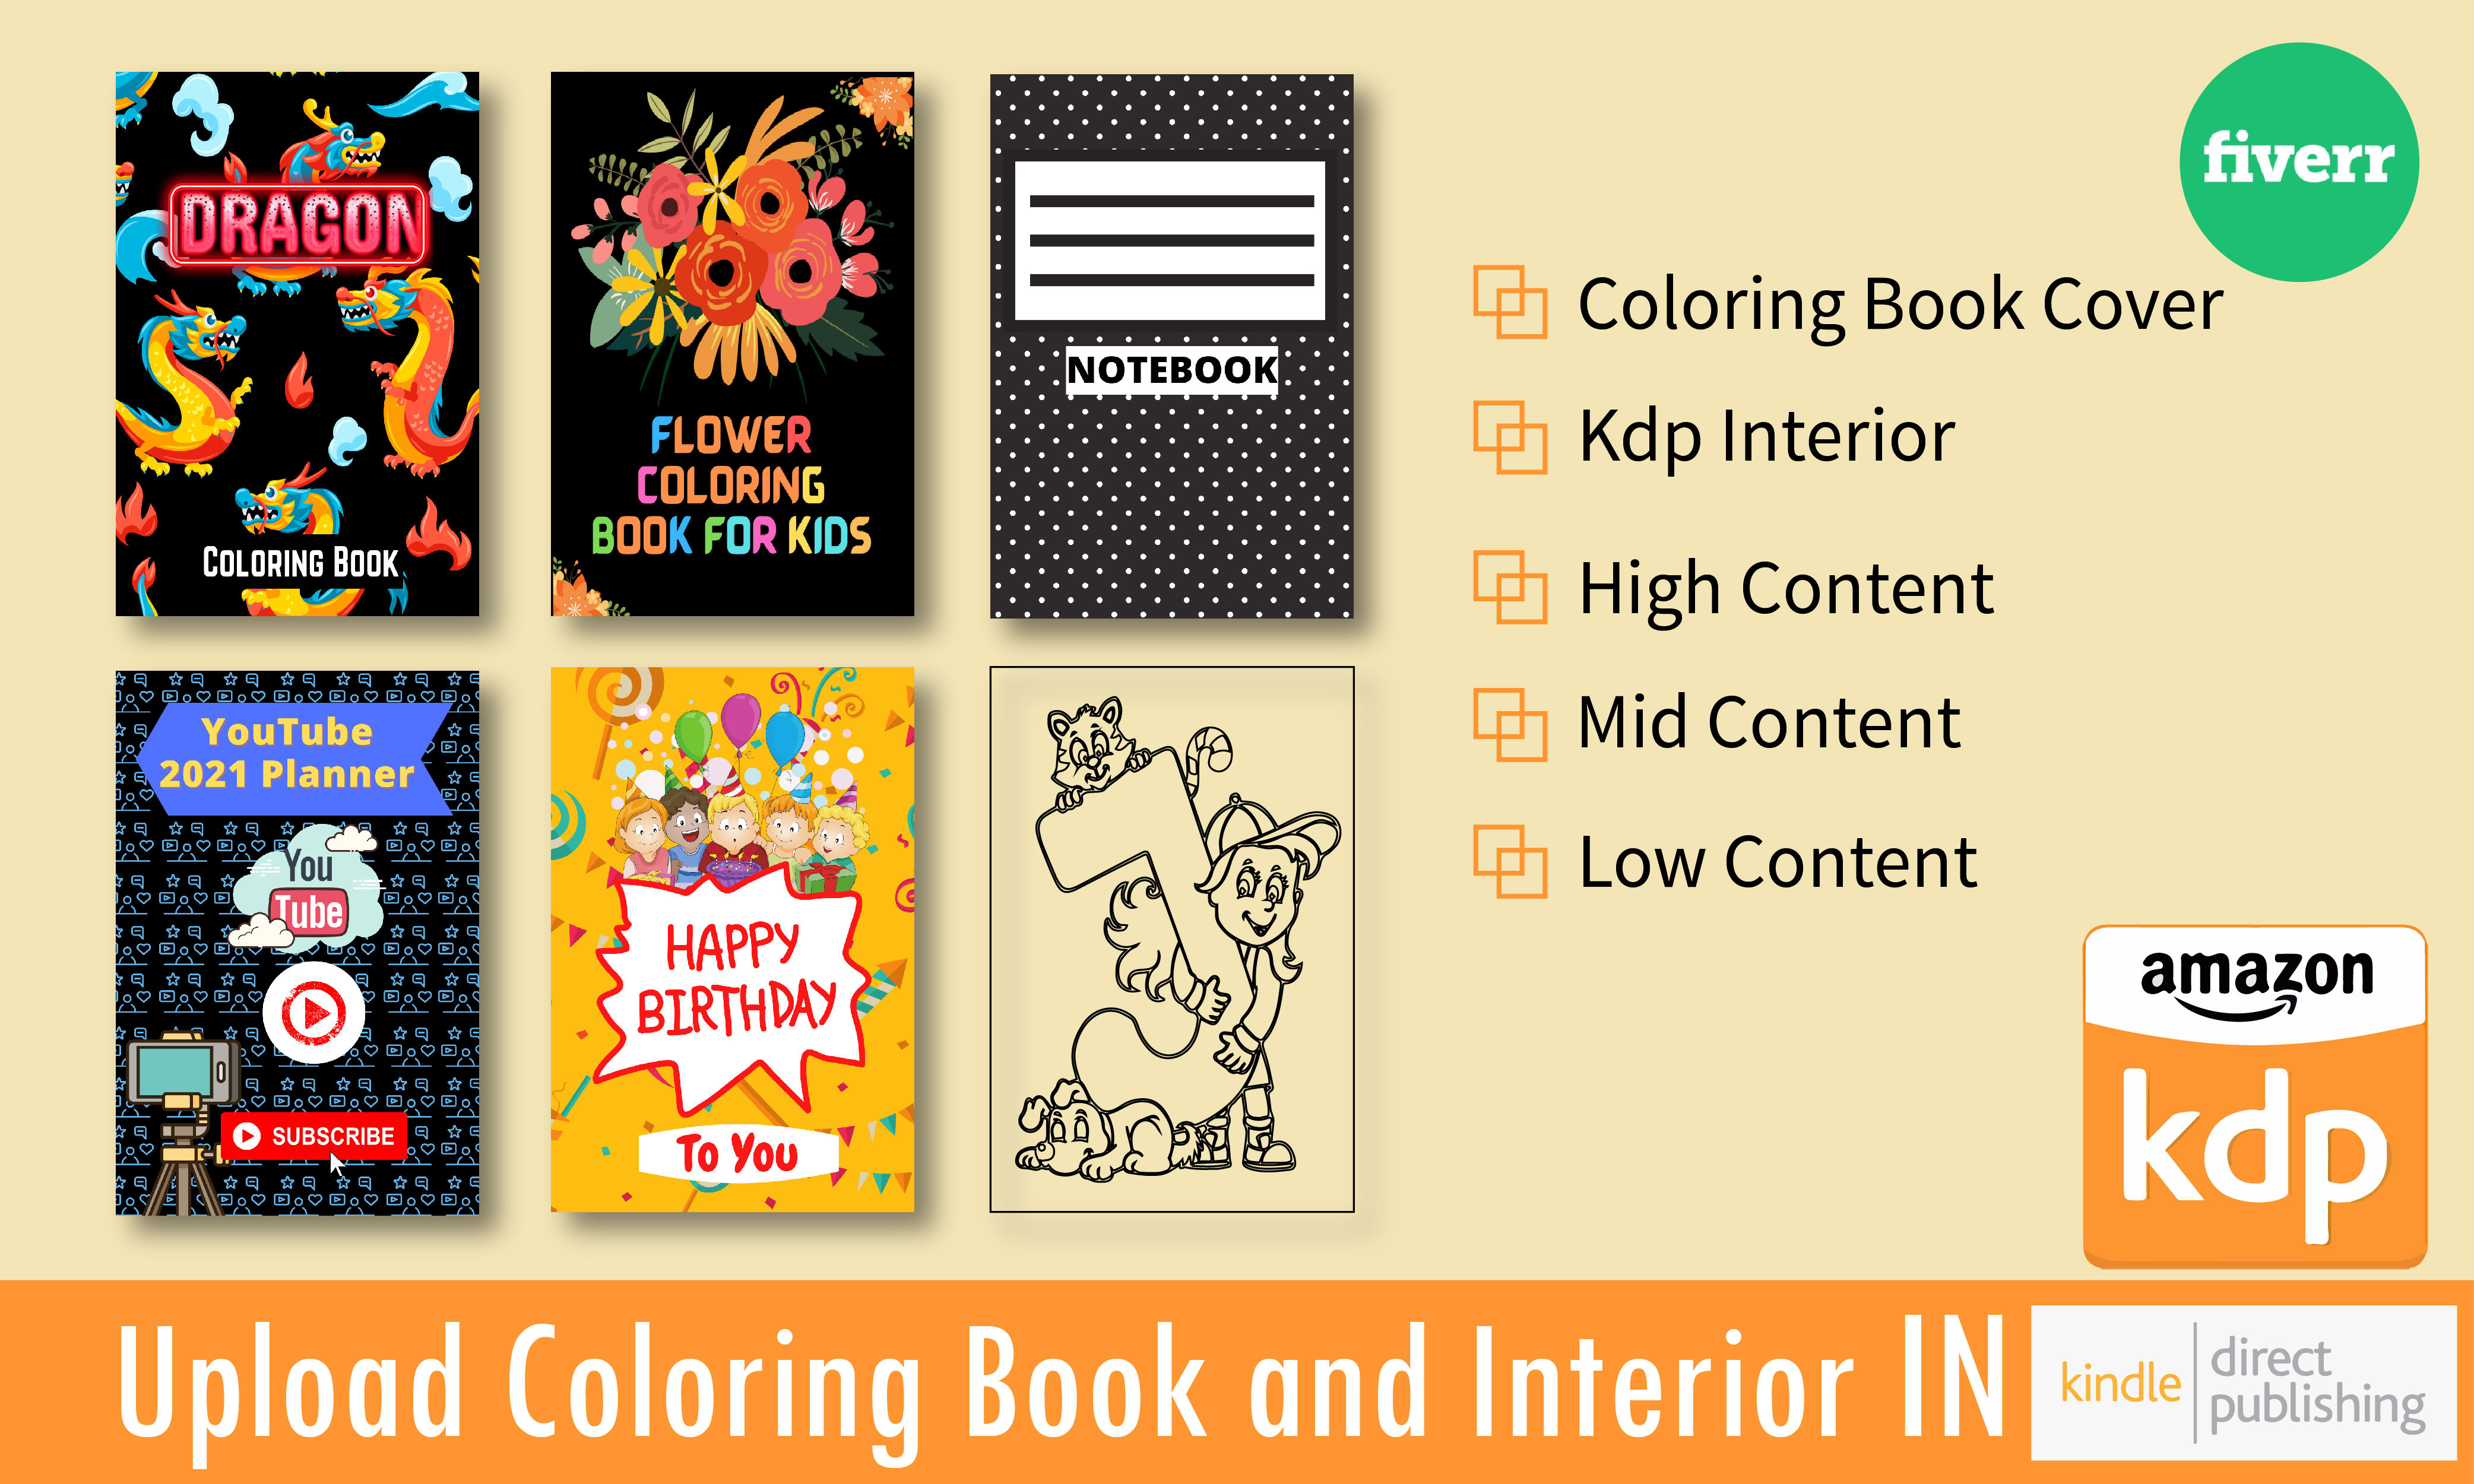 Download Design Adult Coloring Book Cover And Interior For Amazon Kdp By Rehana20 Fiverr